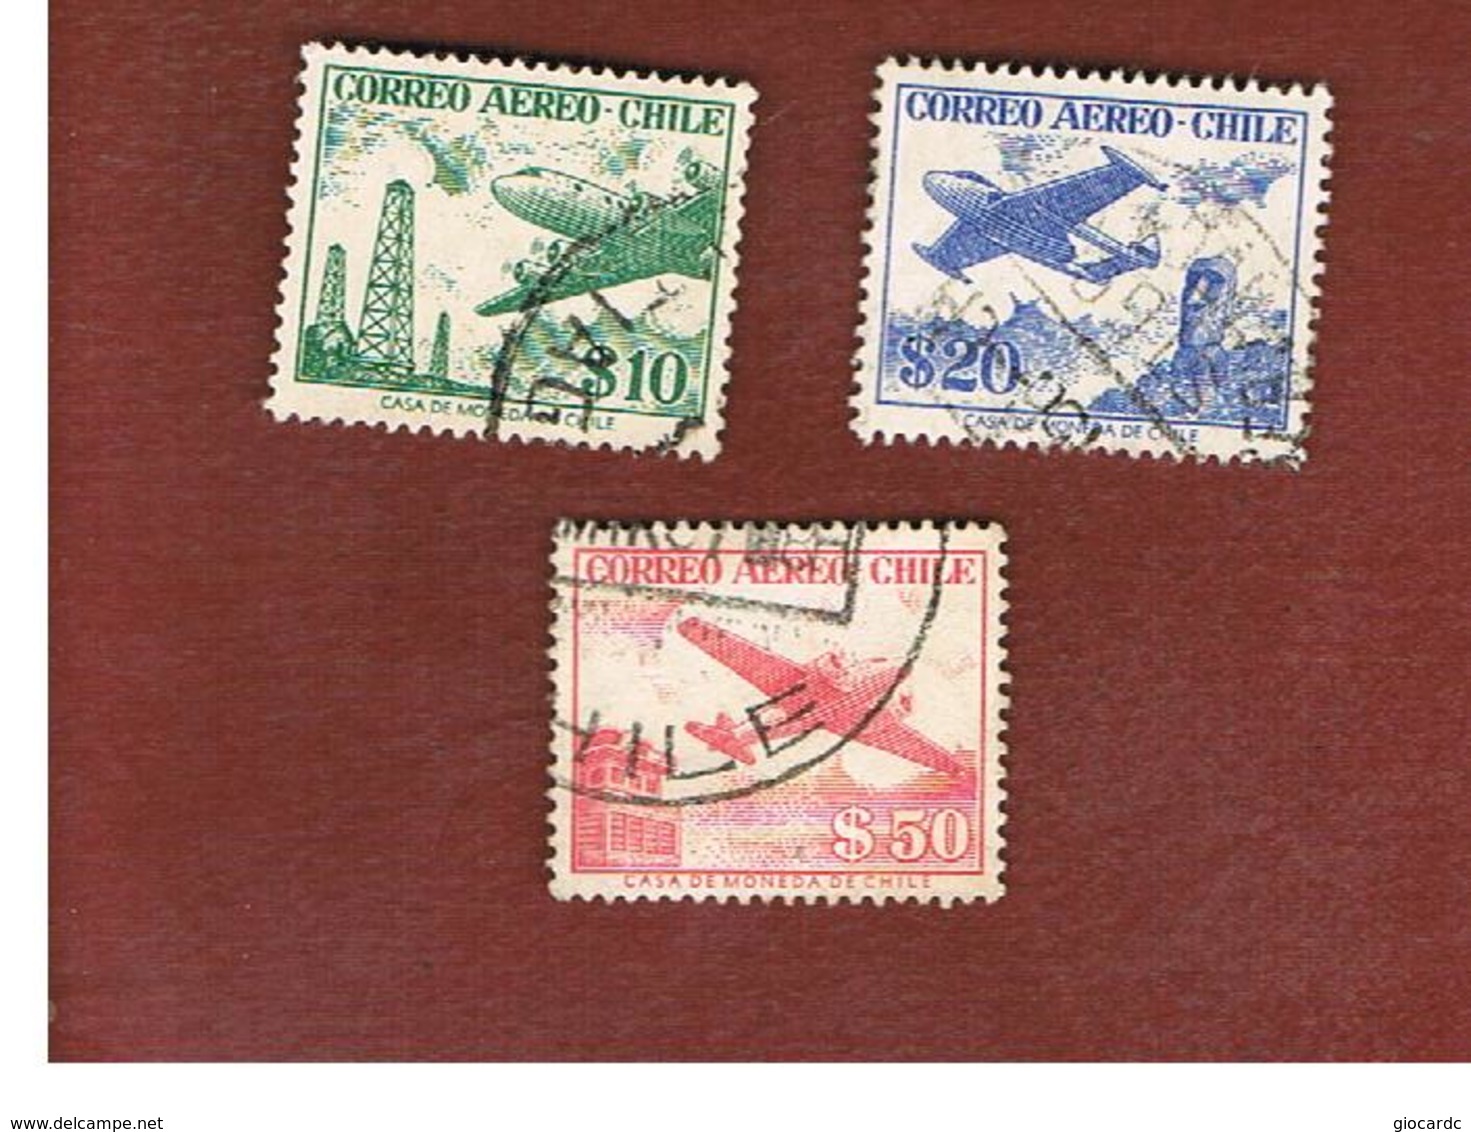 CILE (CHILE)  - SG 456.456b -  1956     AIRPLANES: 3 STAMPS OF THE CURRENT SERIE  -  USED ° - Chile